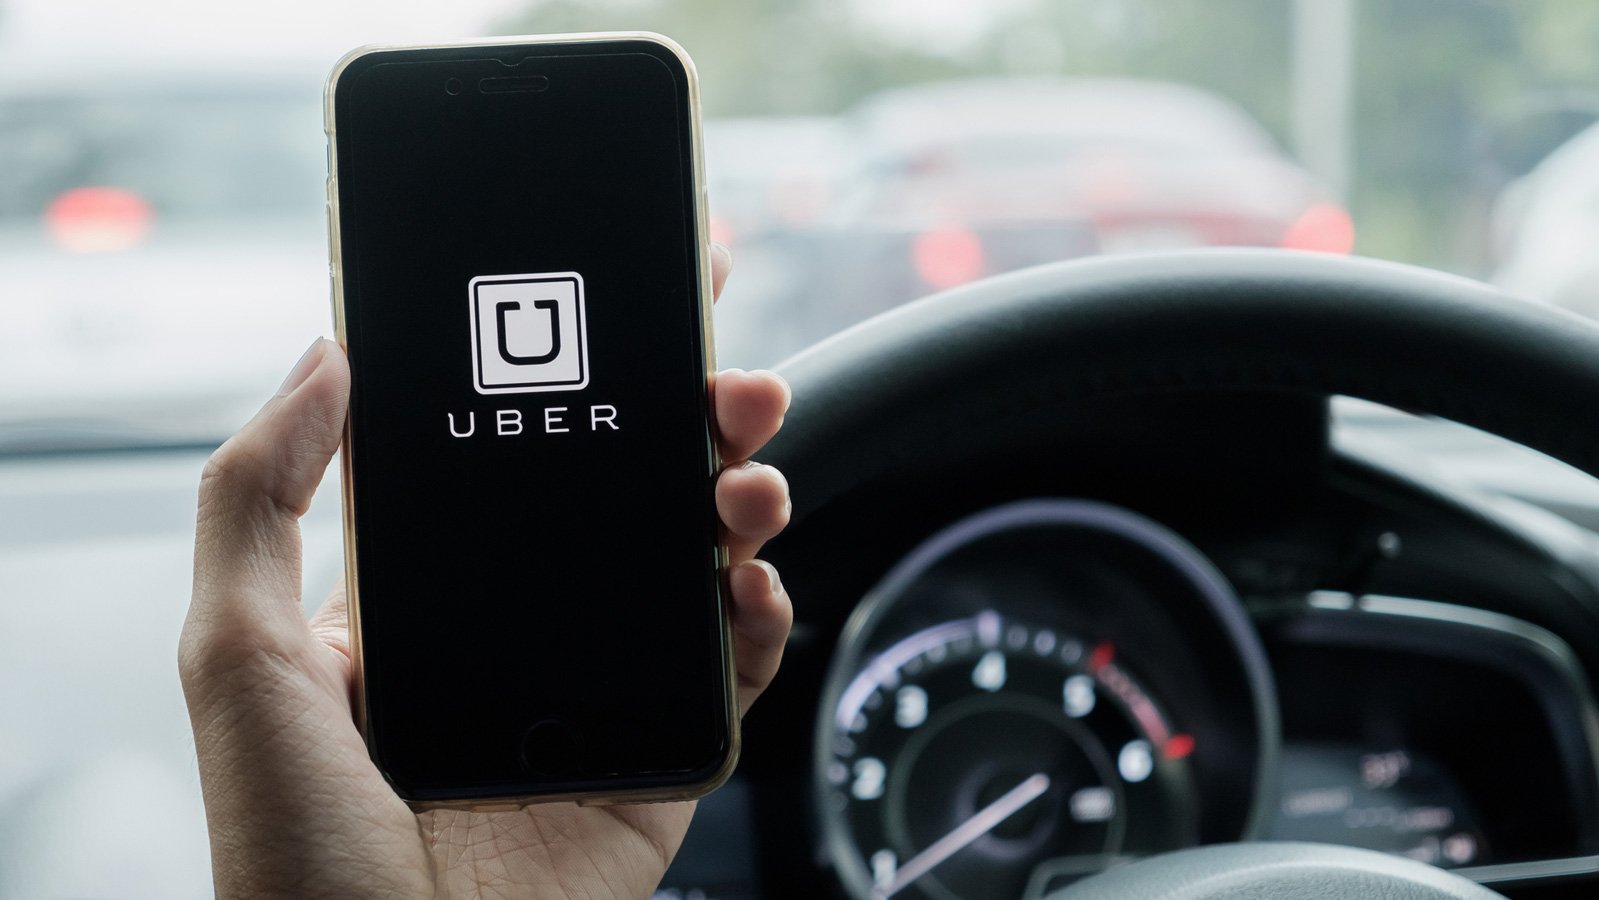 Holding up a phone with Uber logo on it